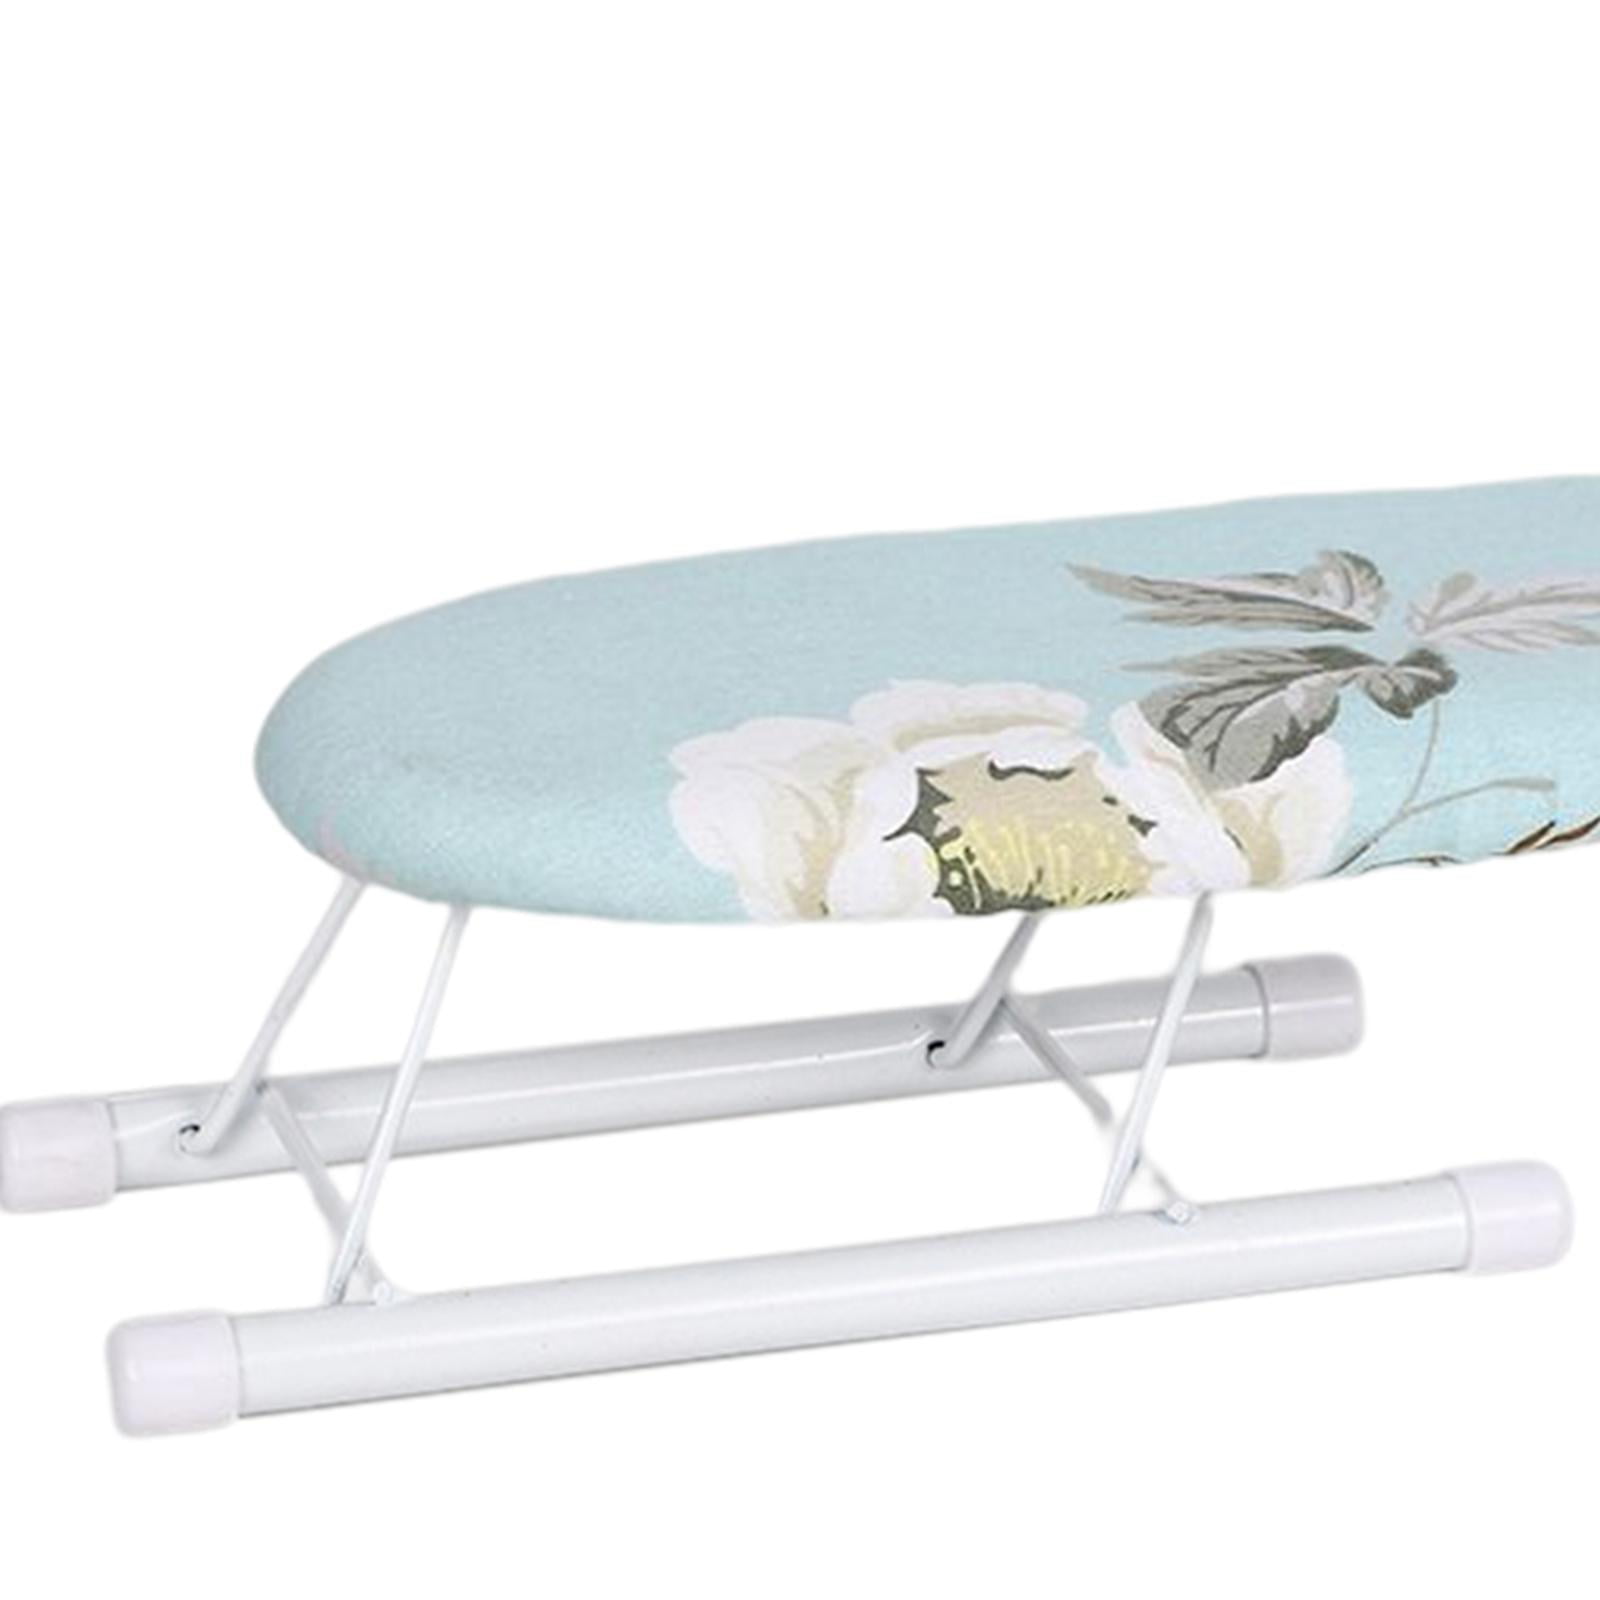 VEVOR Tabletop Ironing Board 23.4 x 14.4, Small Iron Board with Heat  Resistant Cover and 100% Cotton Cover, Mini Ironing Board with 7mm  Thickened